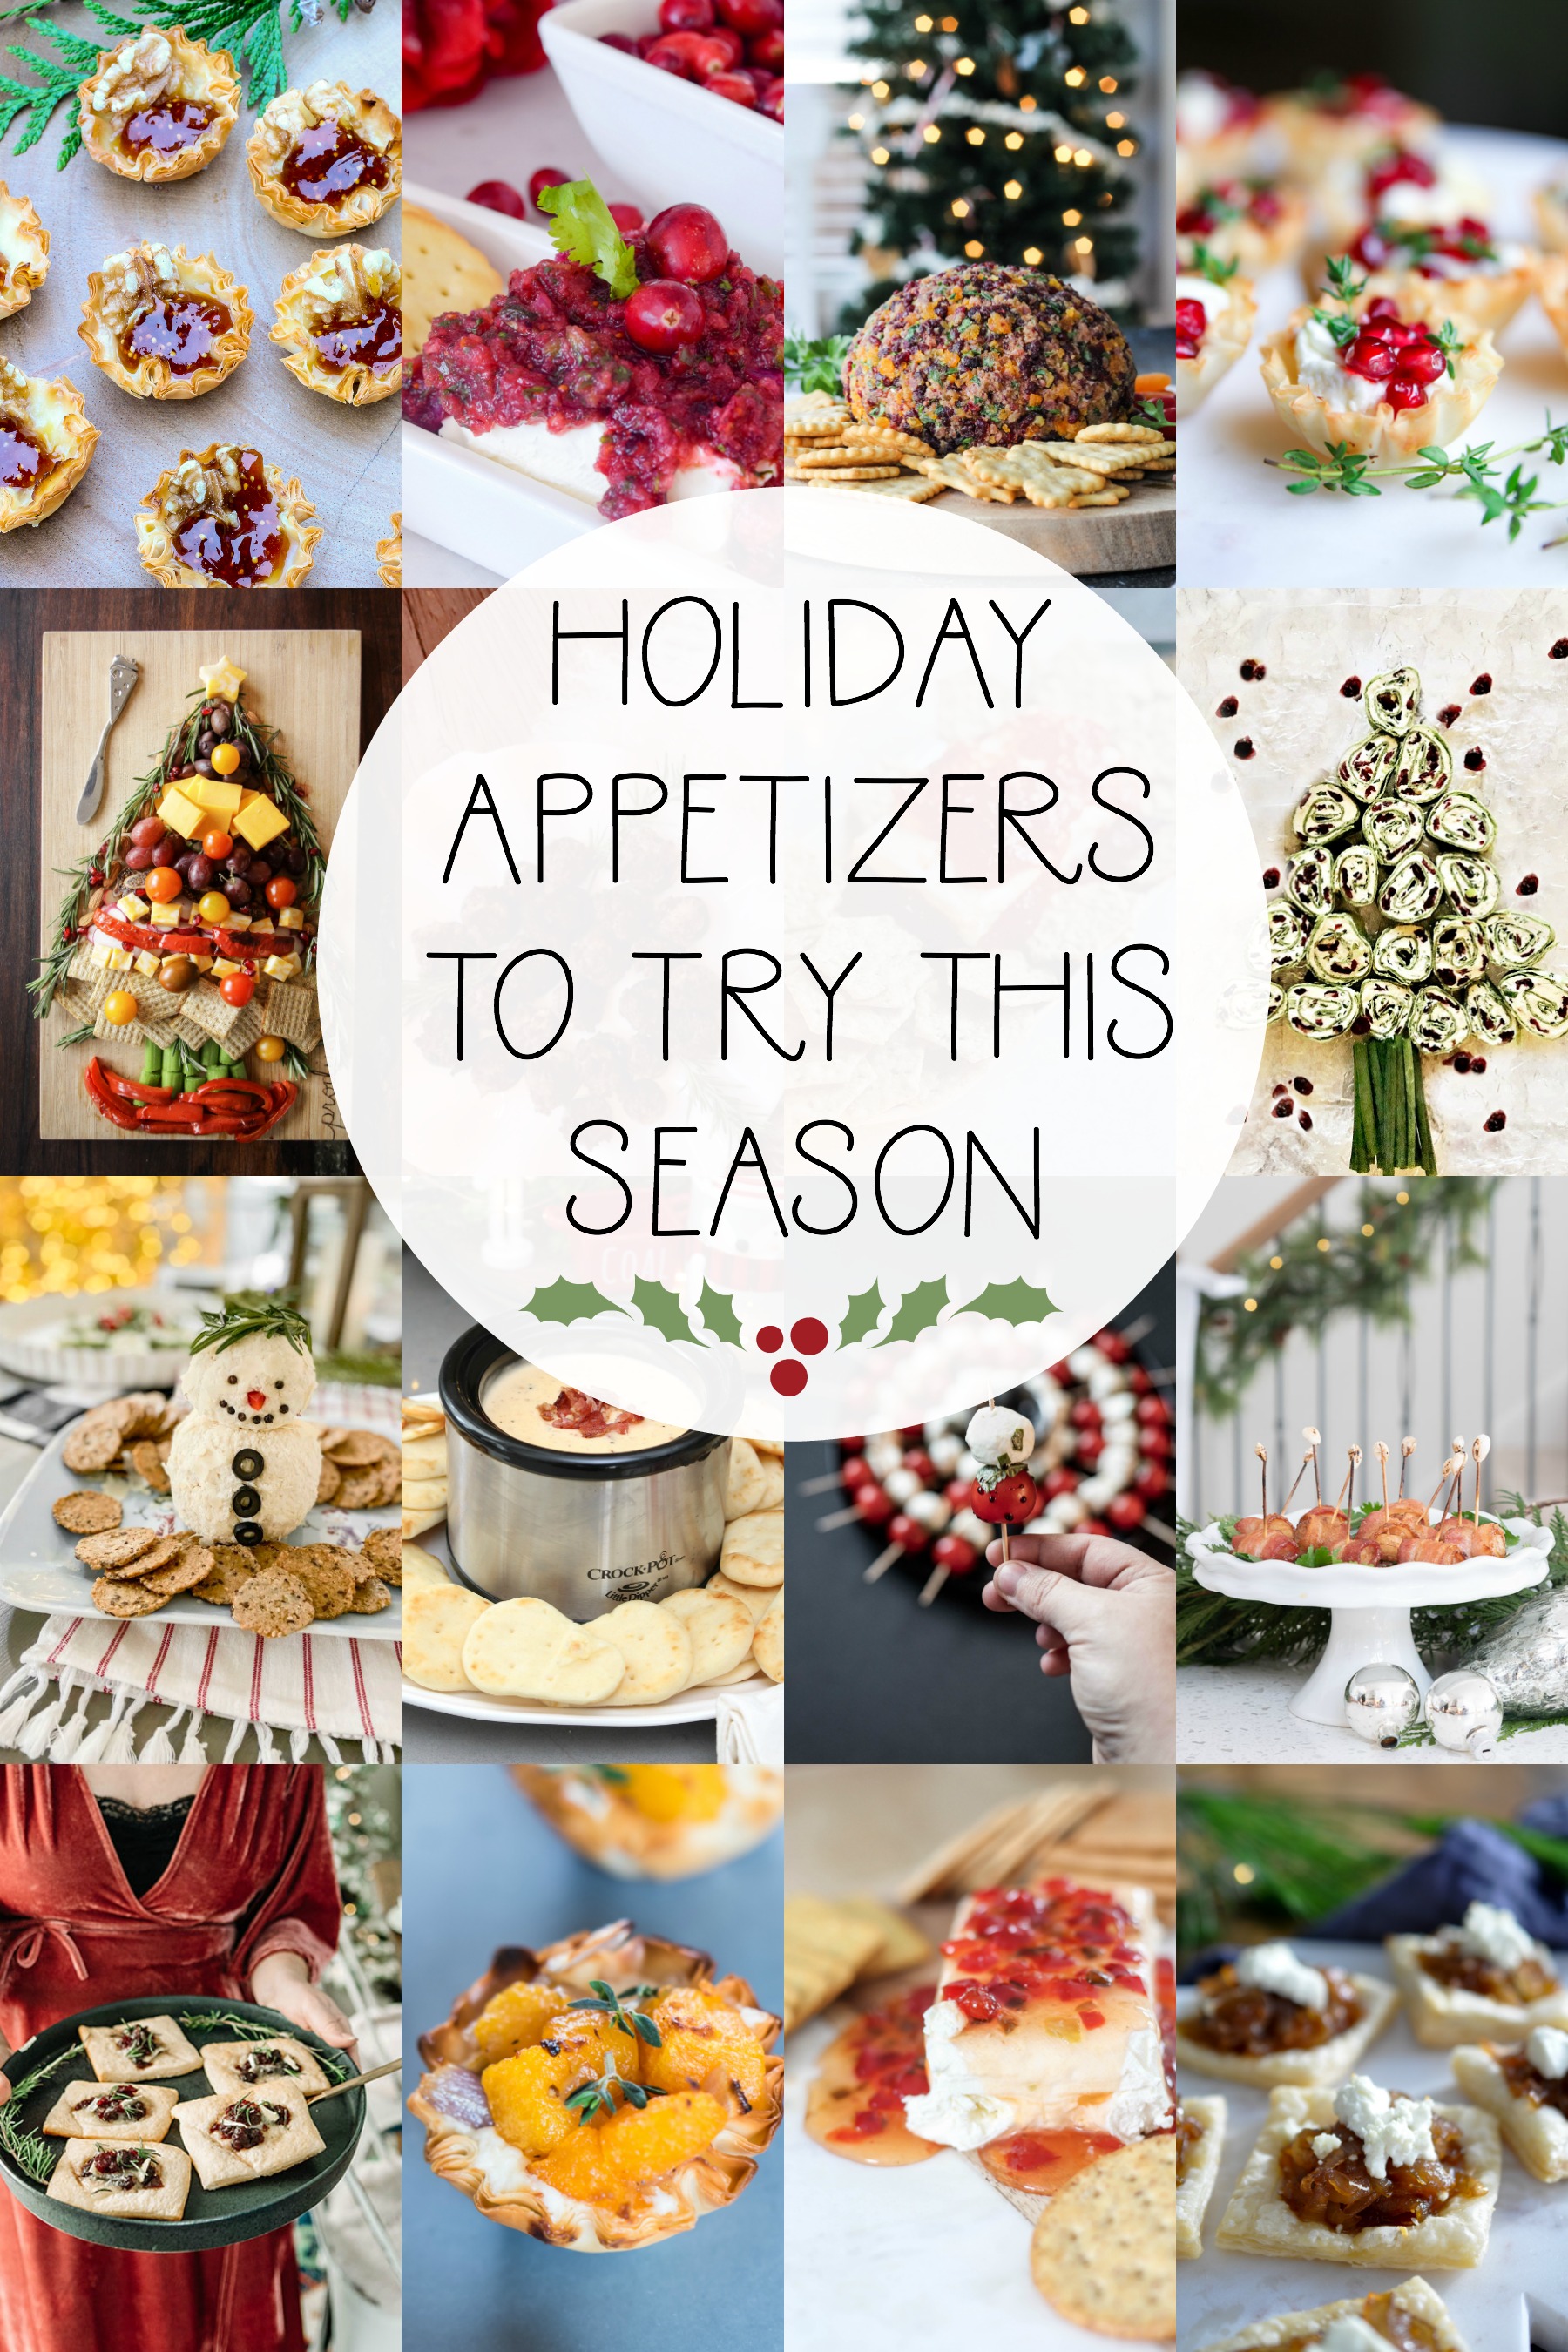 Holiday appetizers to try this season poster.